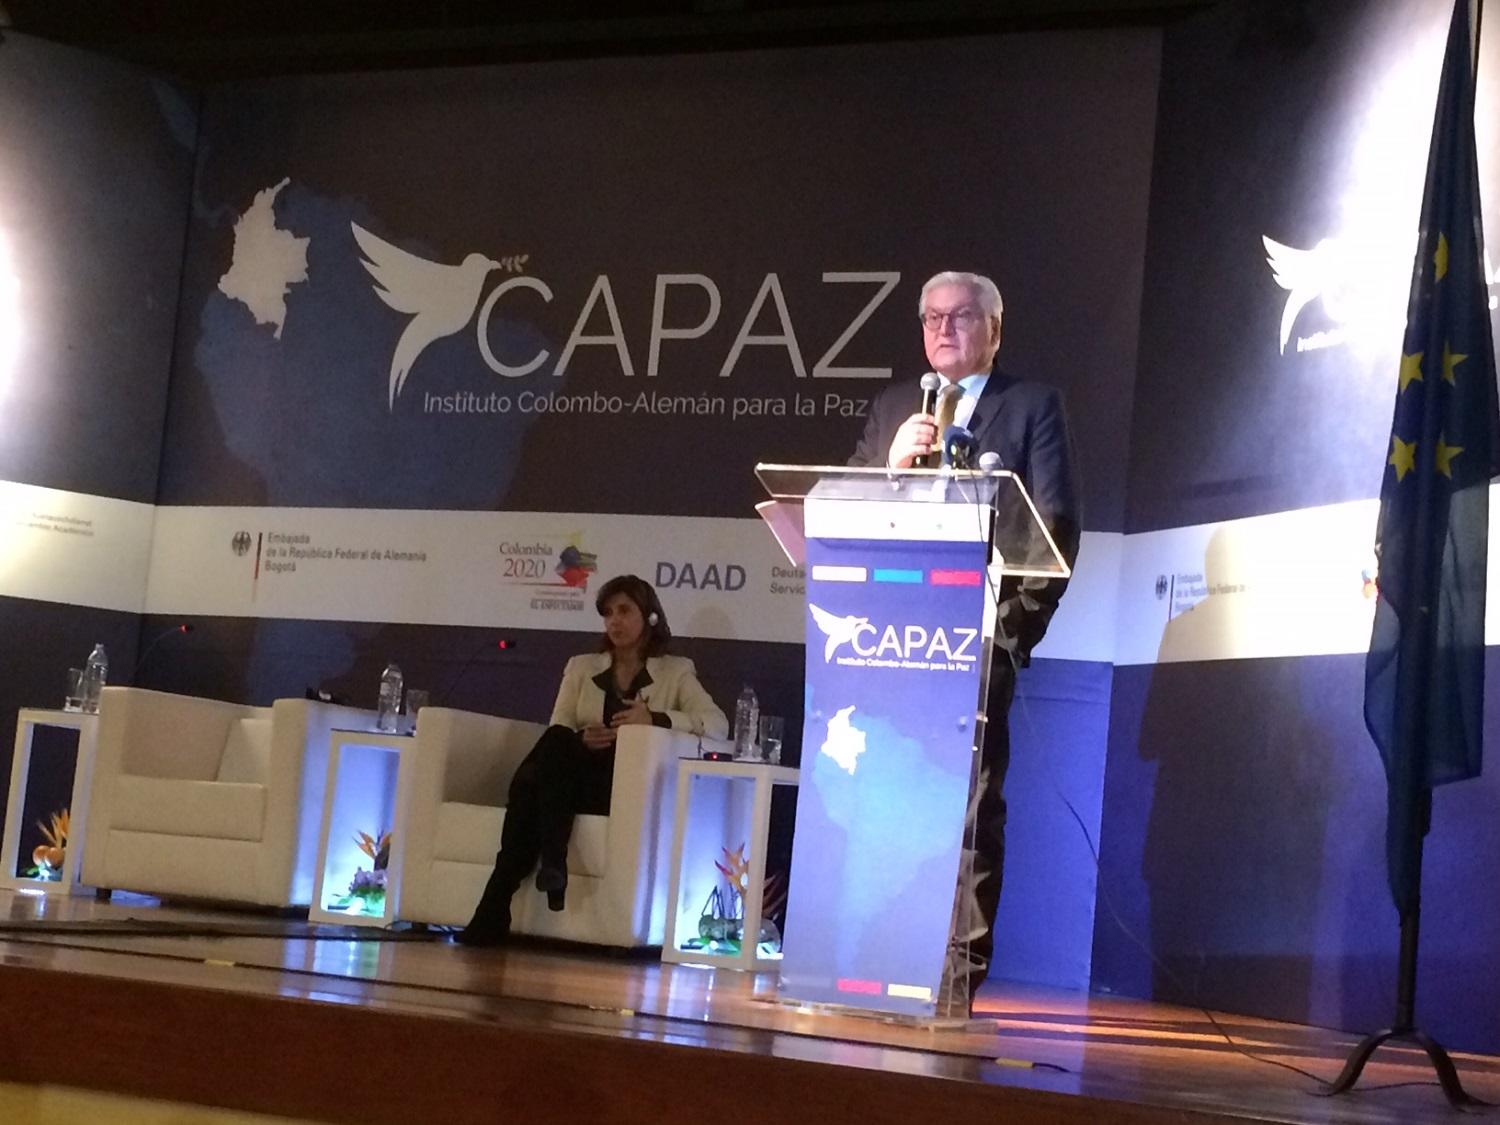 Opening ceremony of the CAPAZ Institute with foreign minister of Germany: Steinmeier